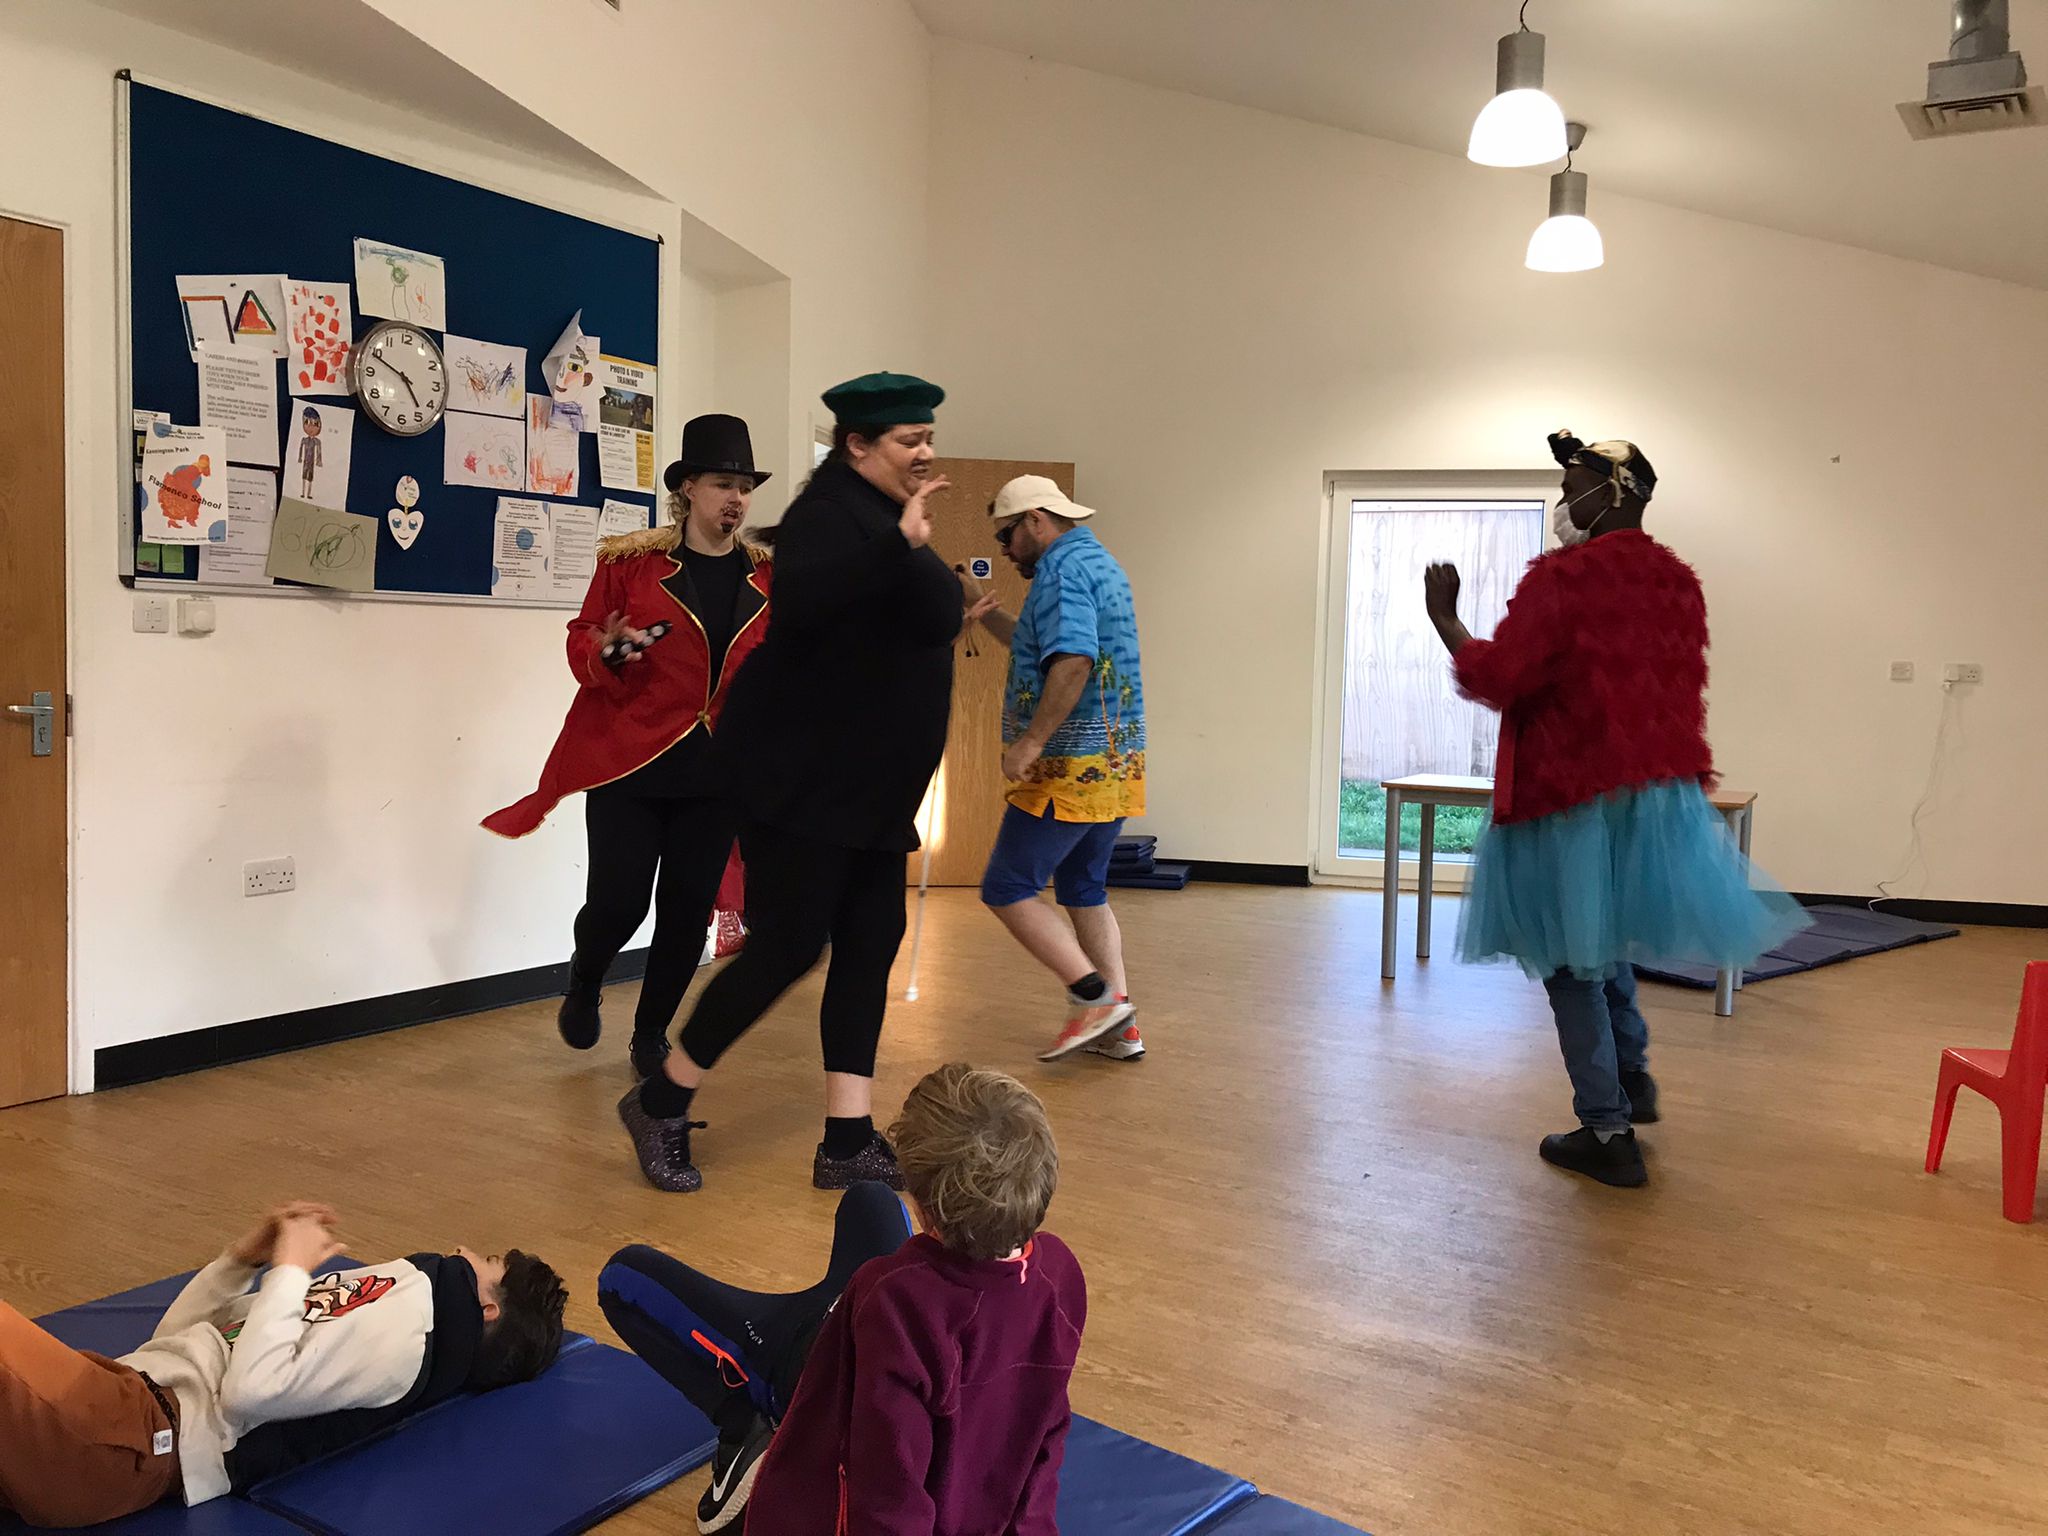 4 characters from Super Power Panto running around in a circle while 2 children watch them.